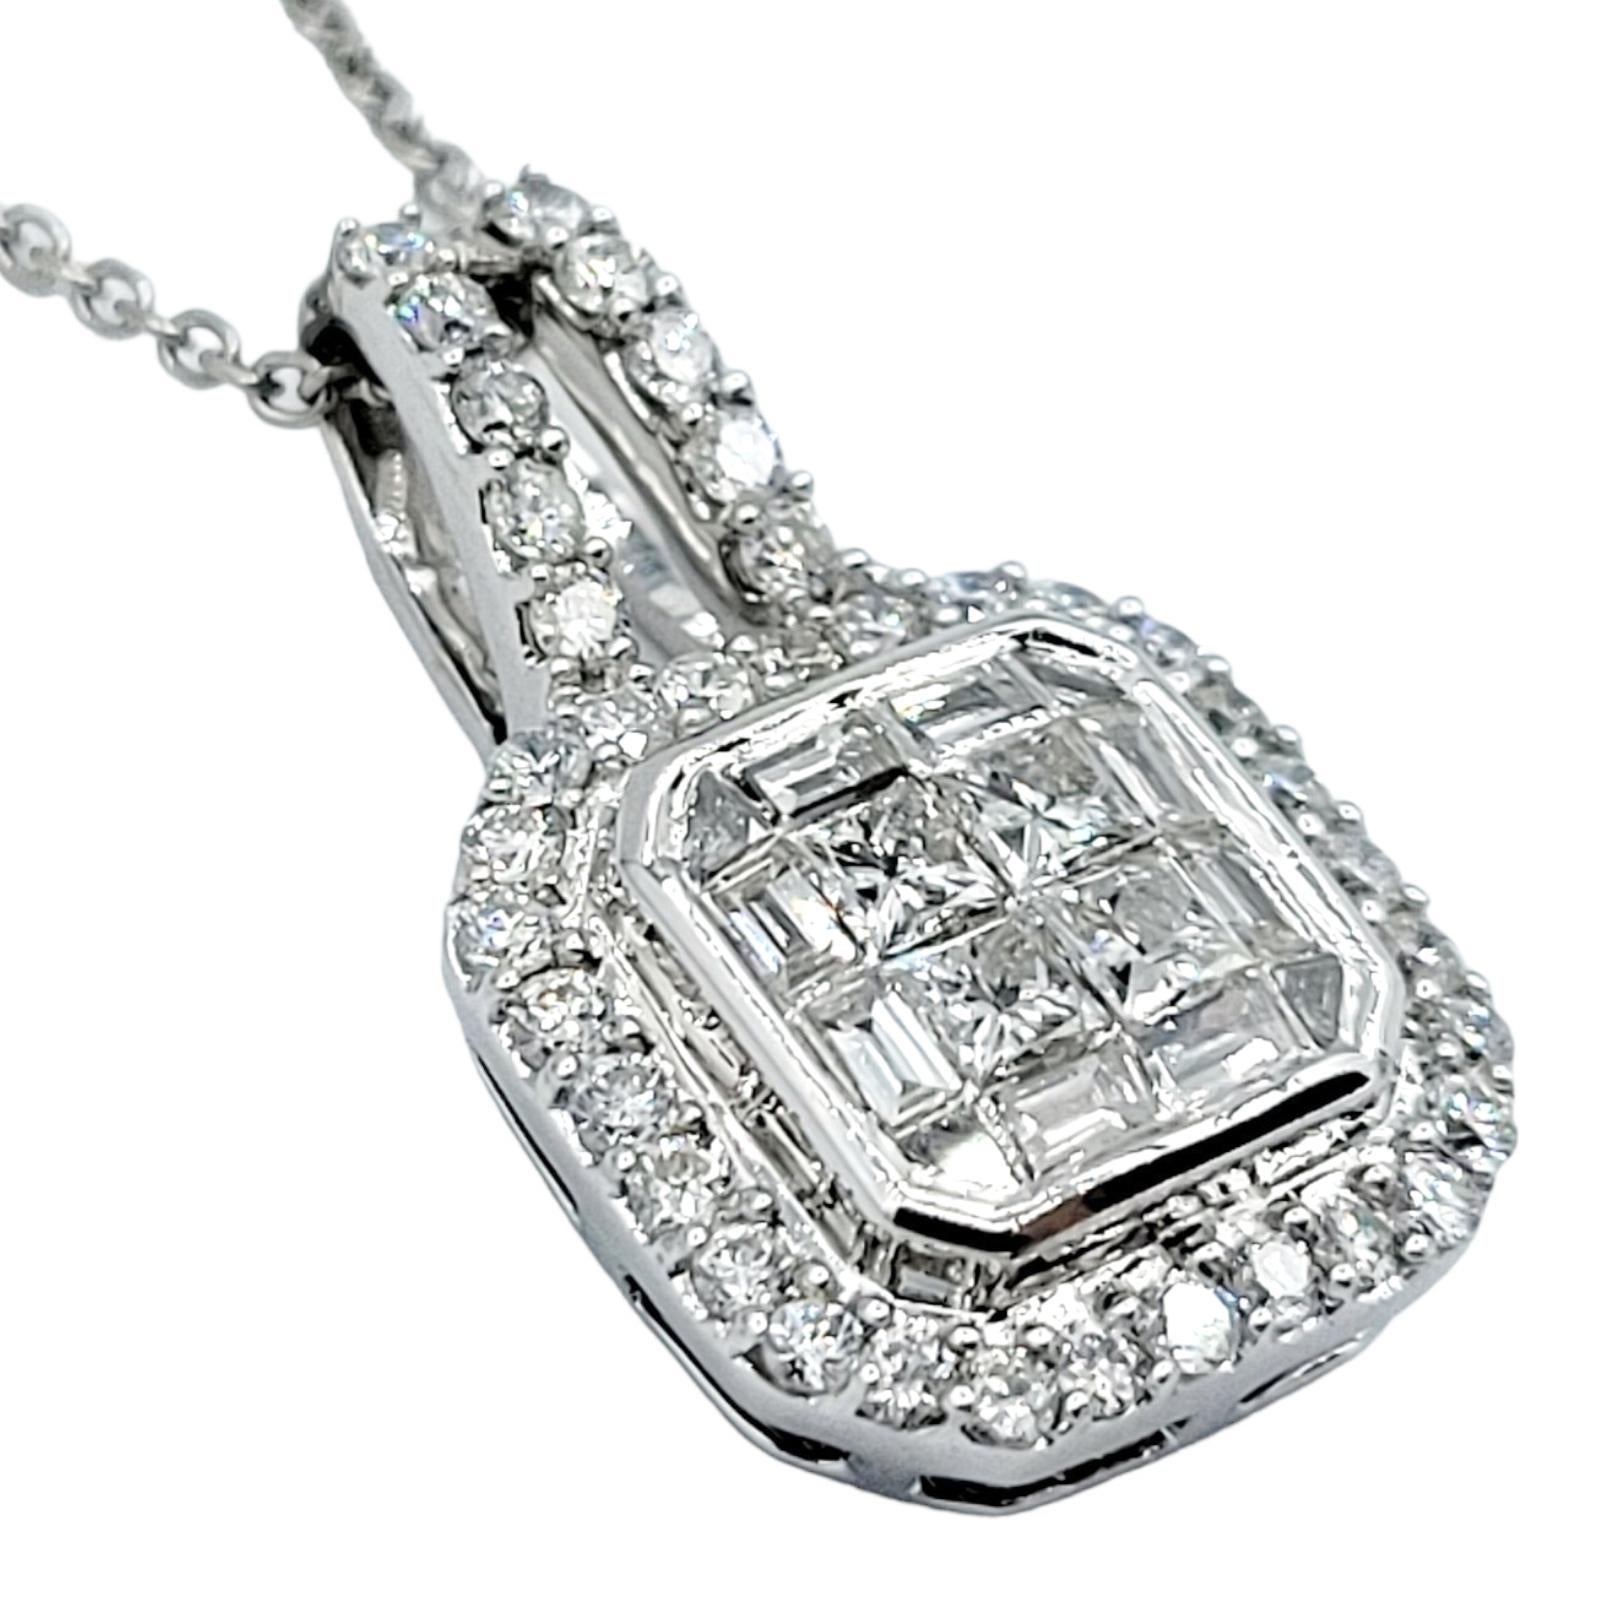 Shown here is an exquisite diamond pendant necklace featuring a harmonious blend of round, square, and baguette cut diamonds set in a captivating square-shaped halo pendant, all crafted in 14 karat white gold. This pendant is a true embodiment of